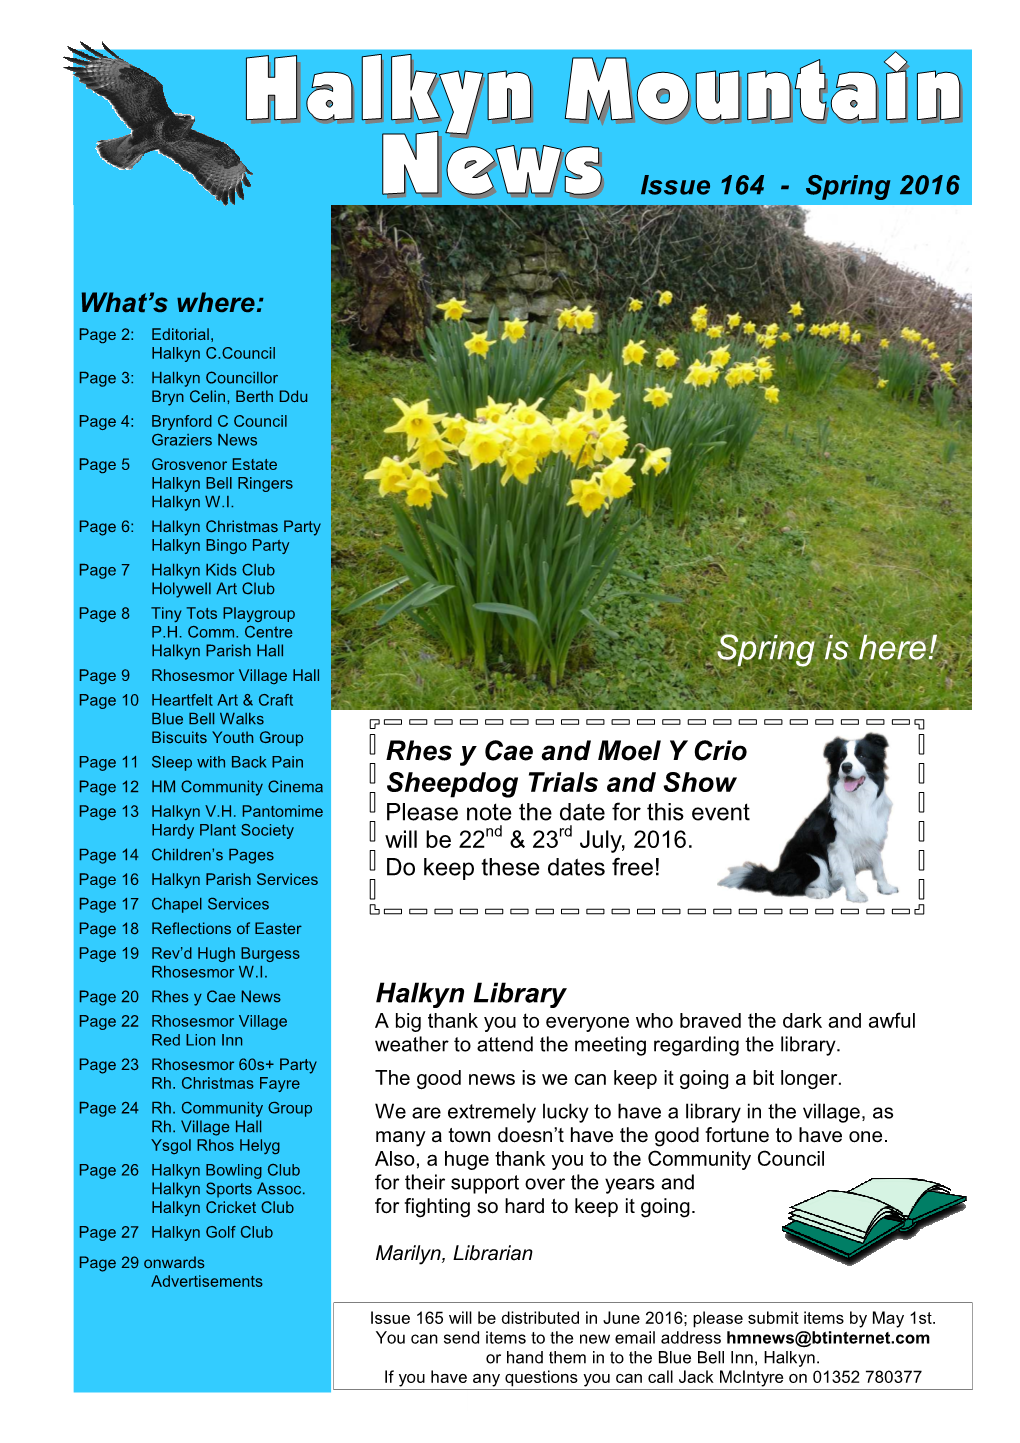 Halkyn Mountain News – Issue 164 Spring 2016